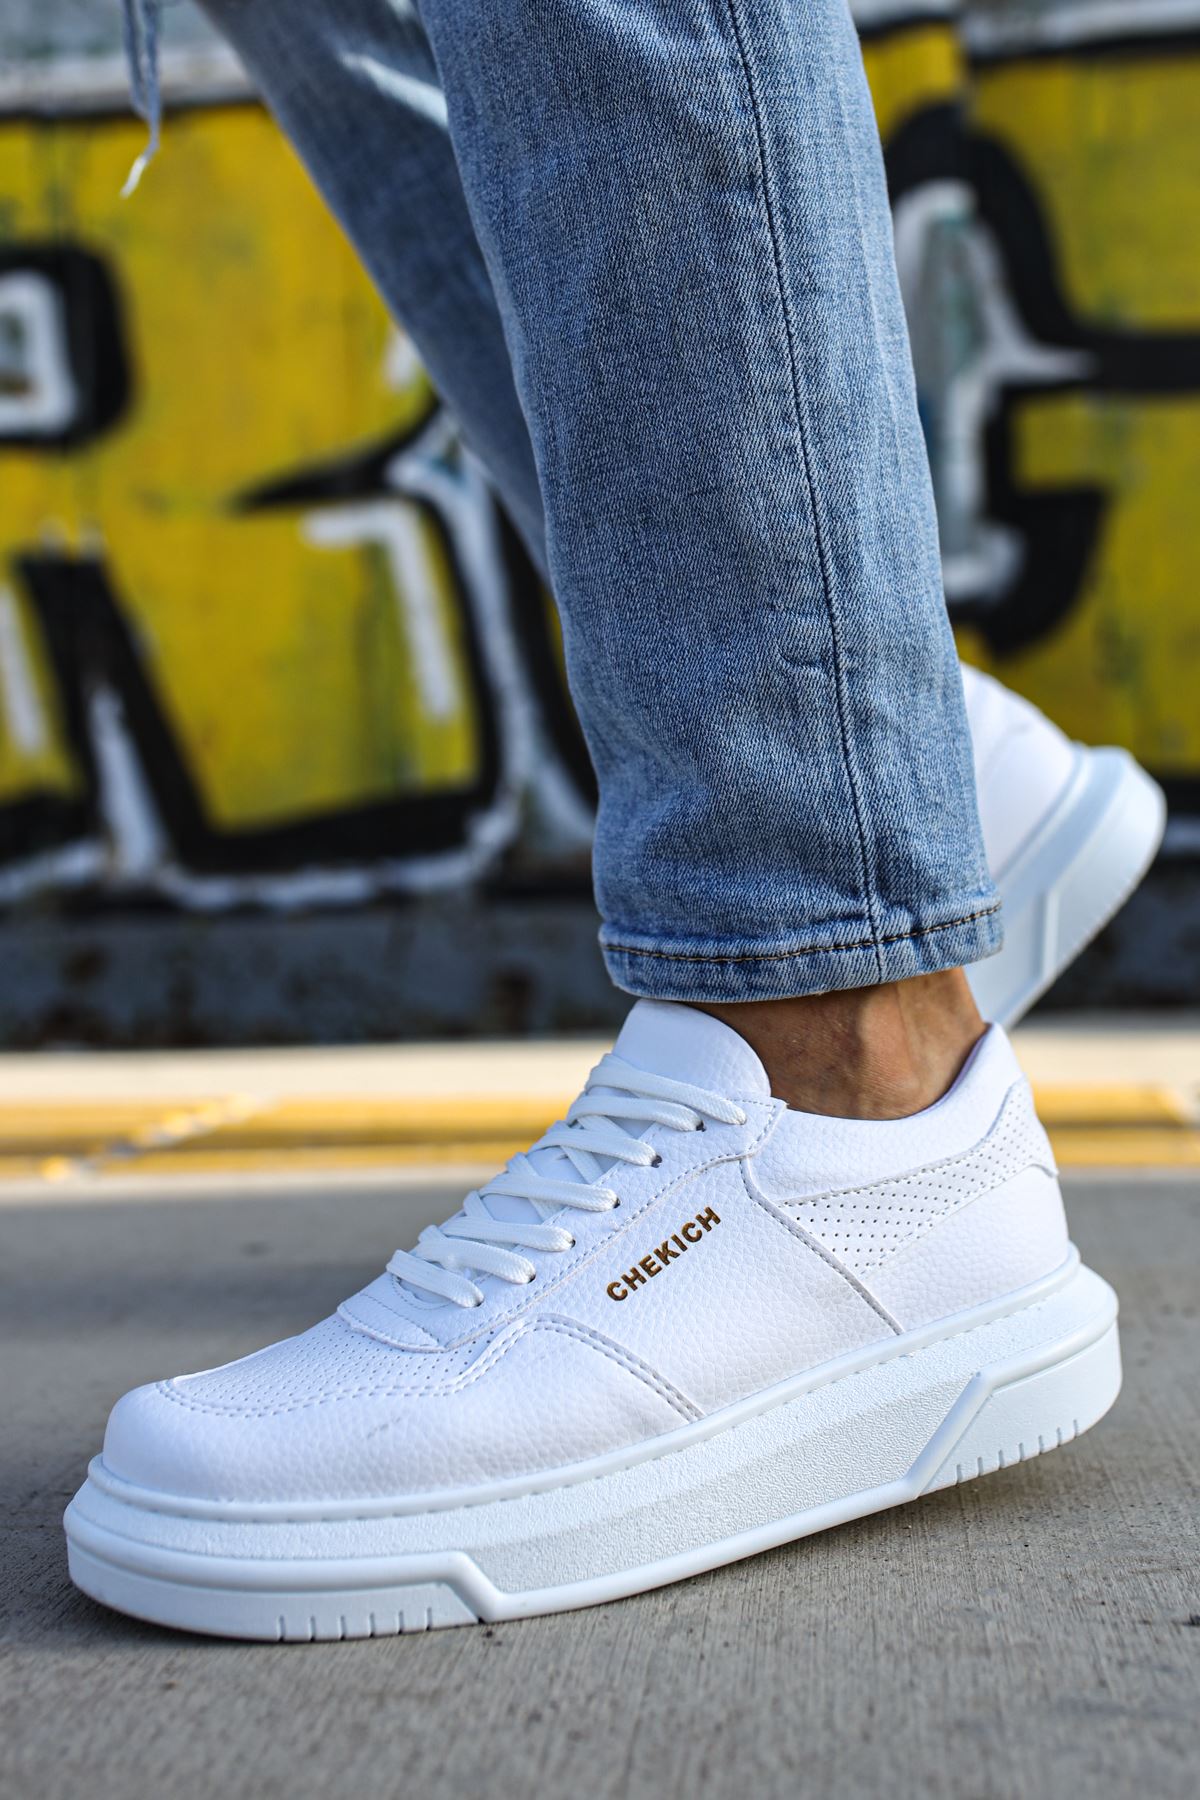 CH075 Men's Unisex Full White Casual Sneaker Sports Shoes - STREETMODE™